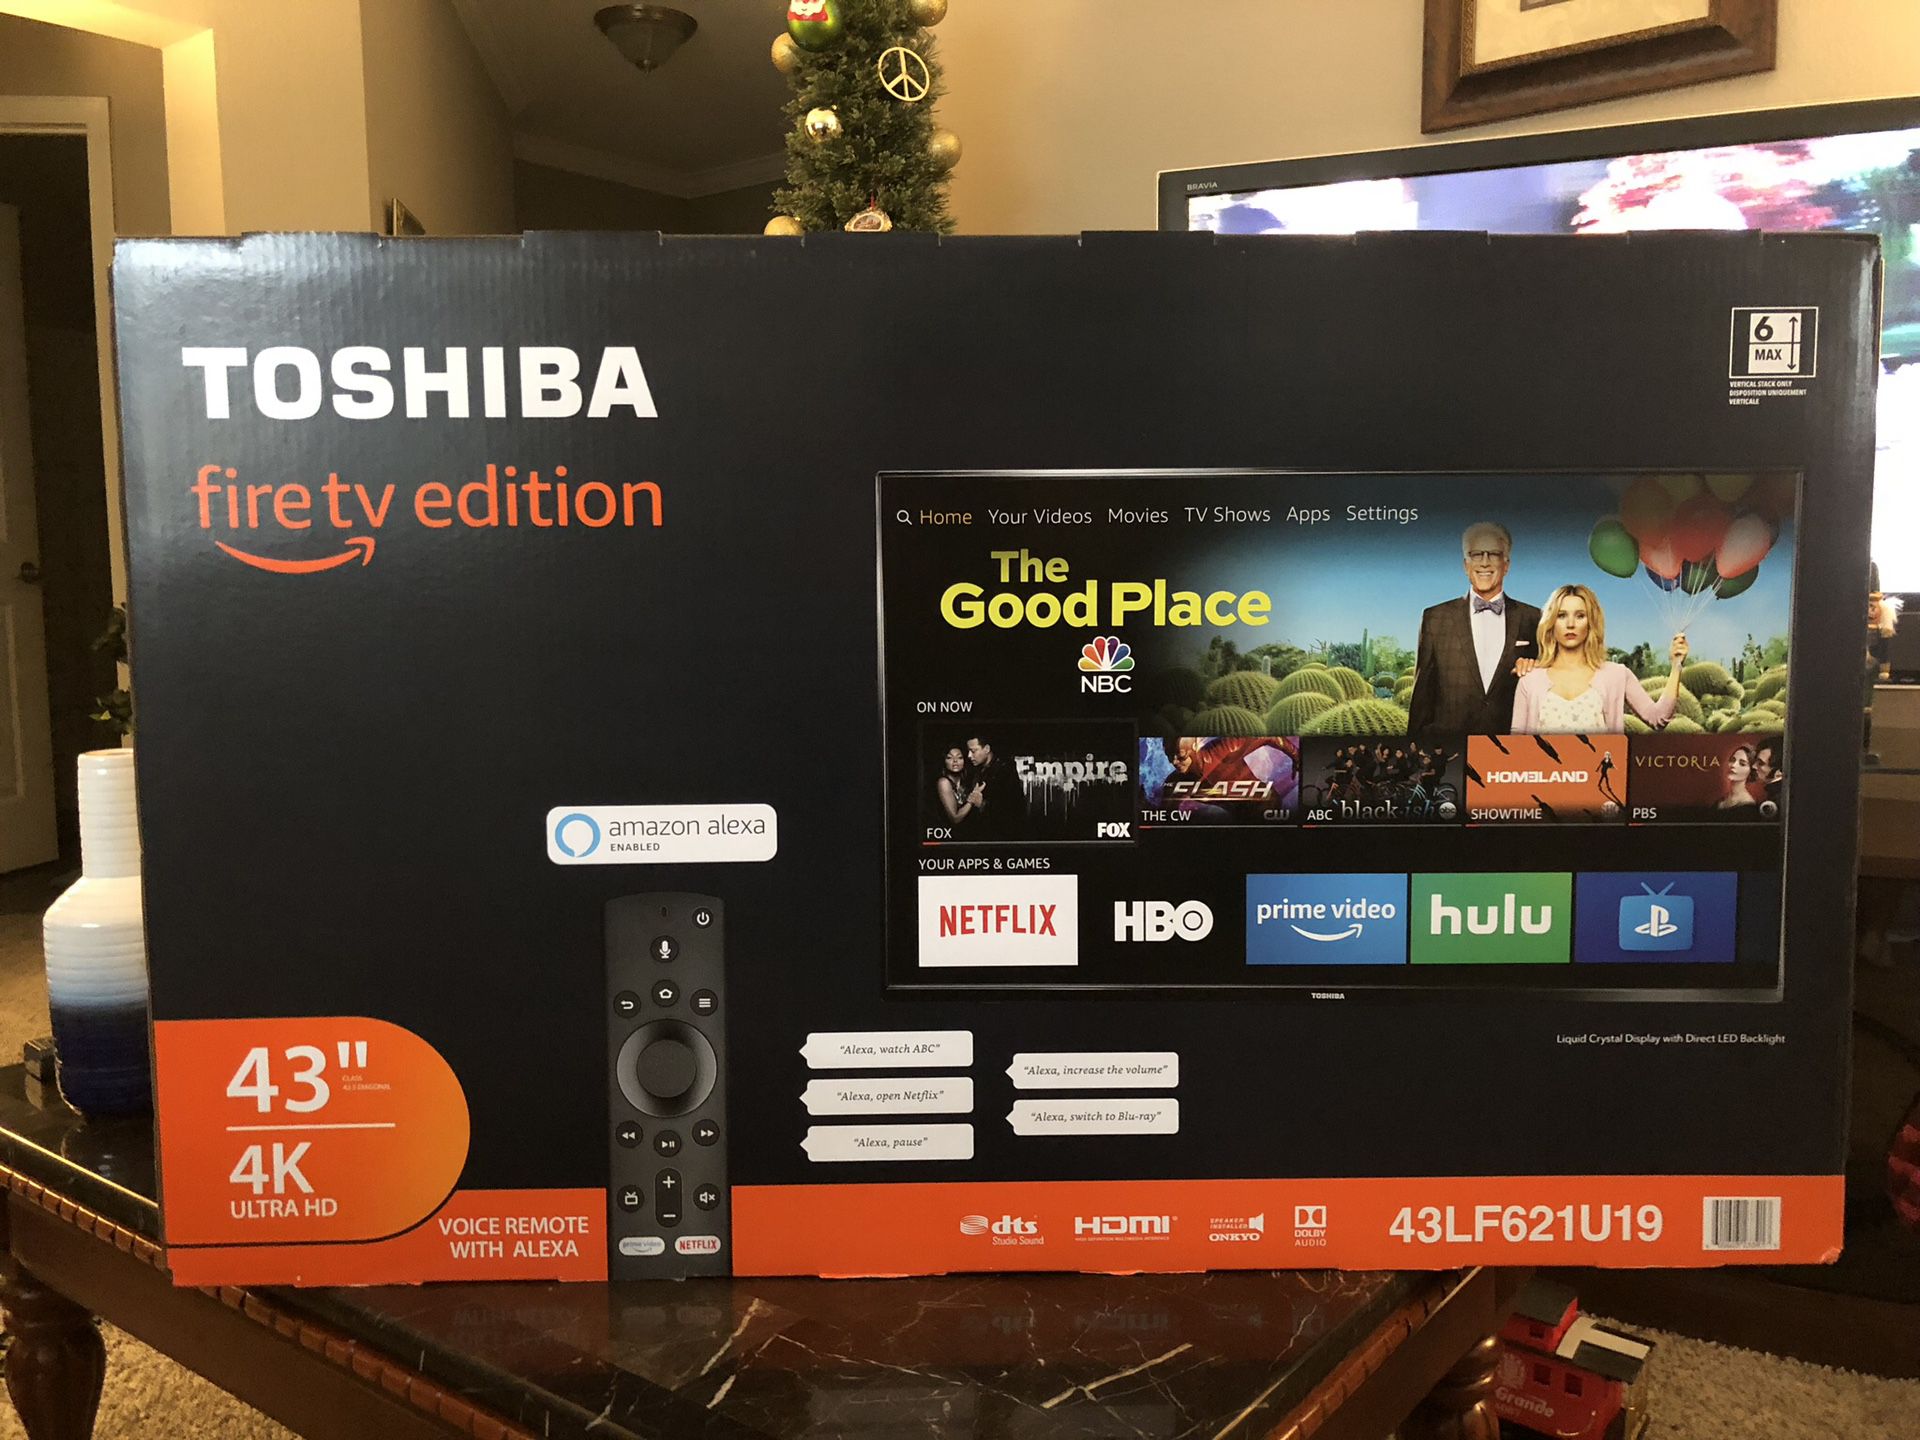 TOSHIBA 43” Fire tv edition SMART 4K ULTRA HD with/voice remote with ALEXA $300